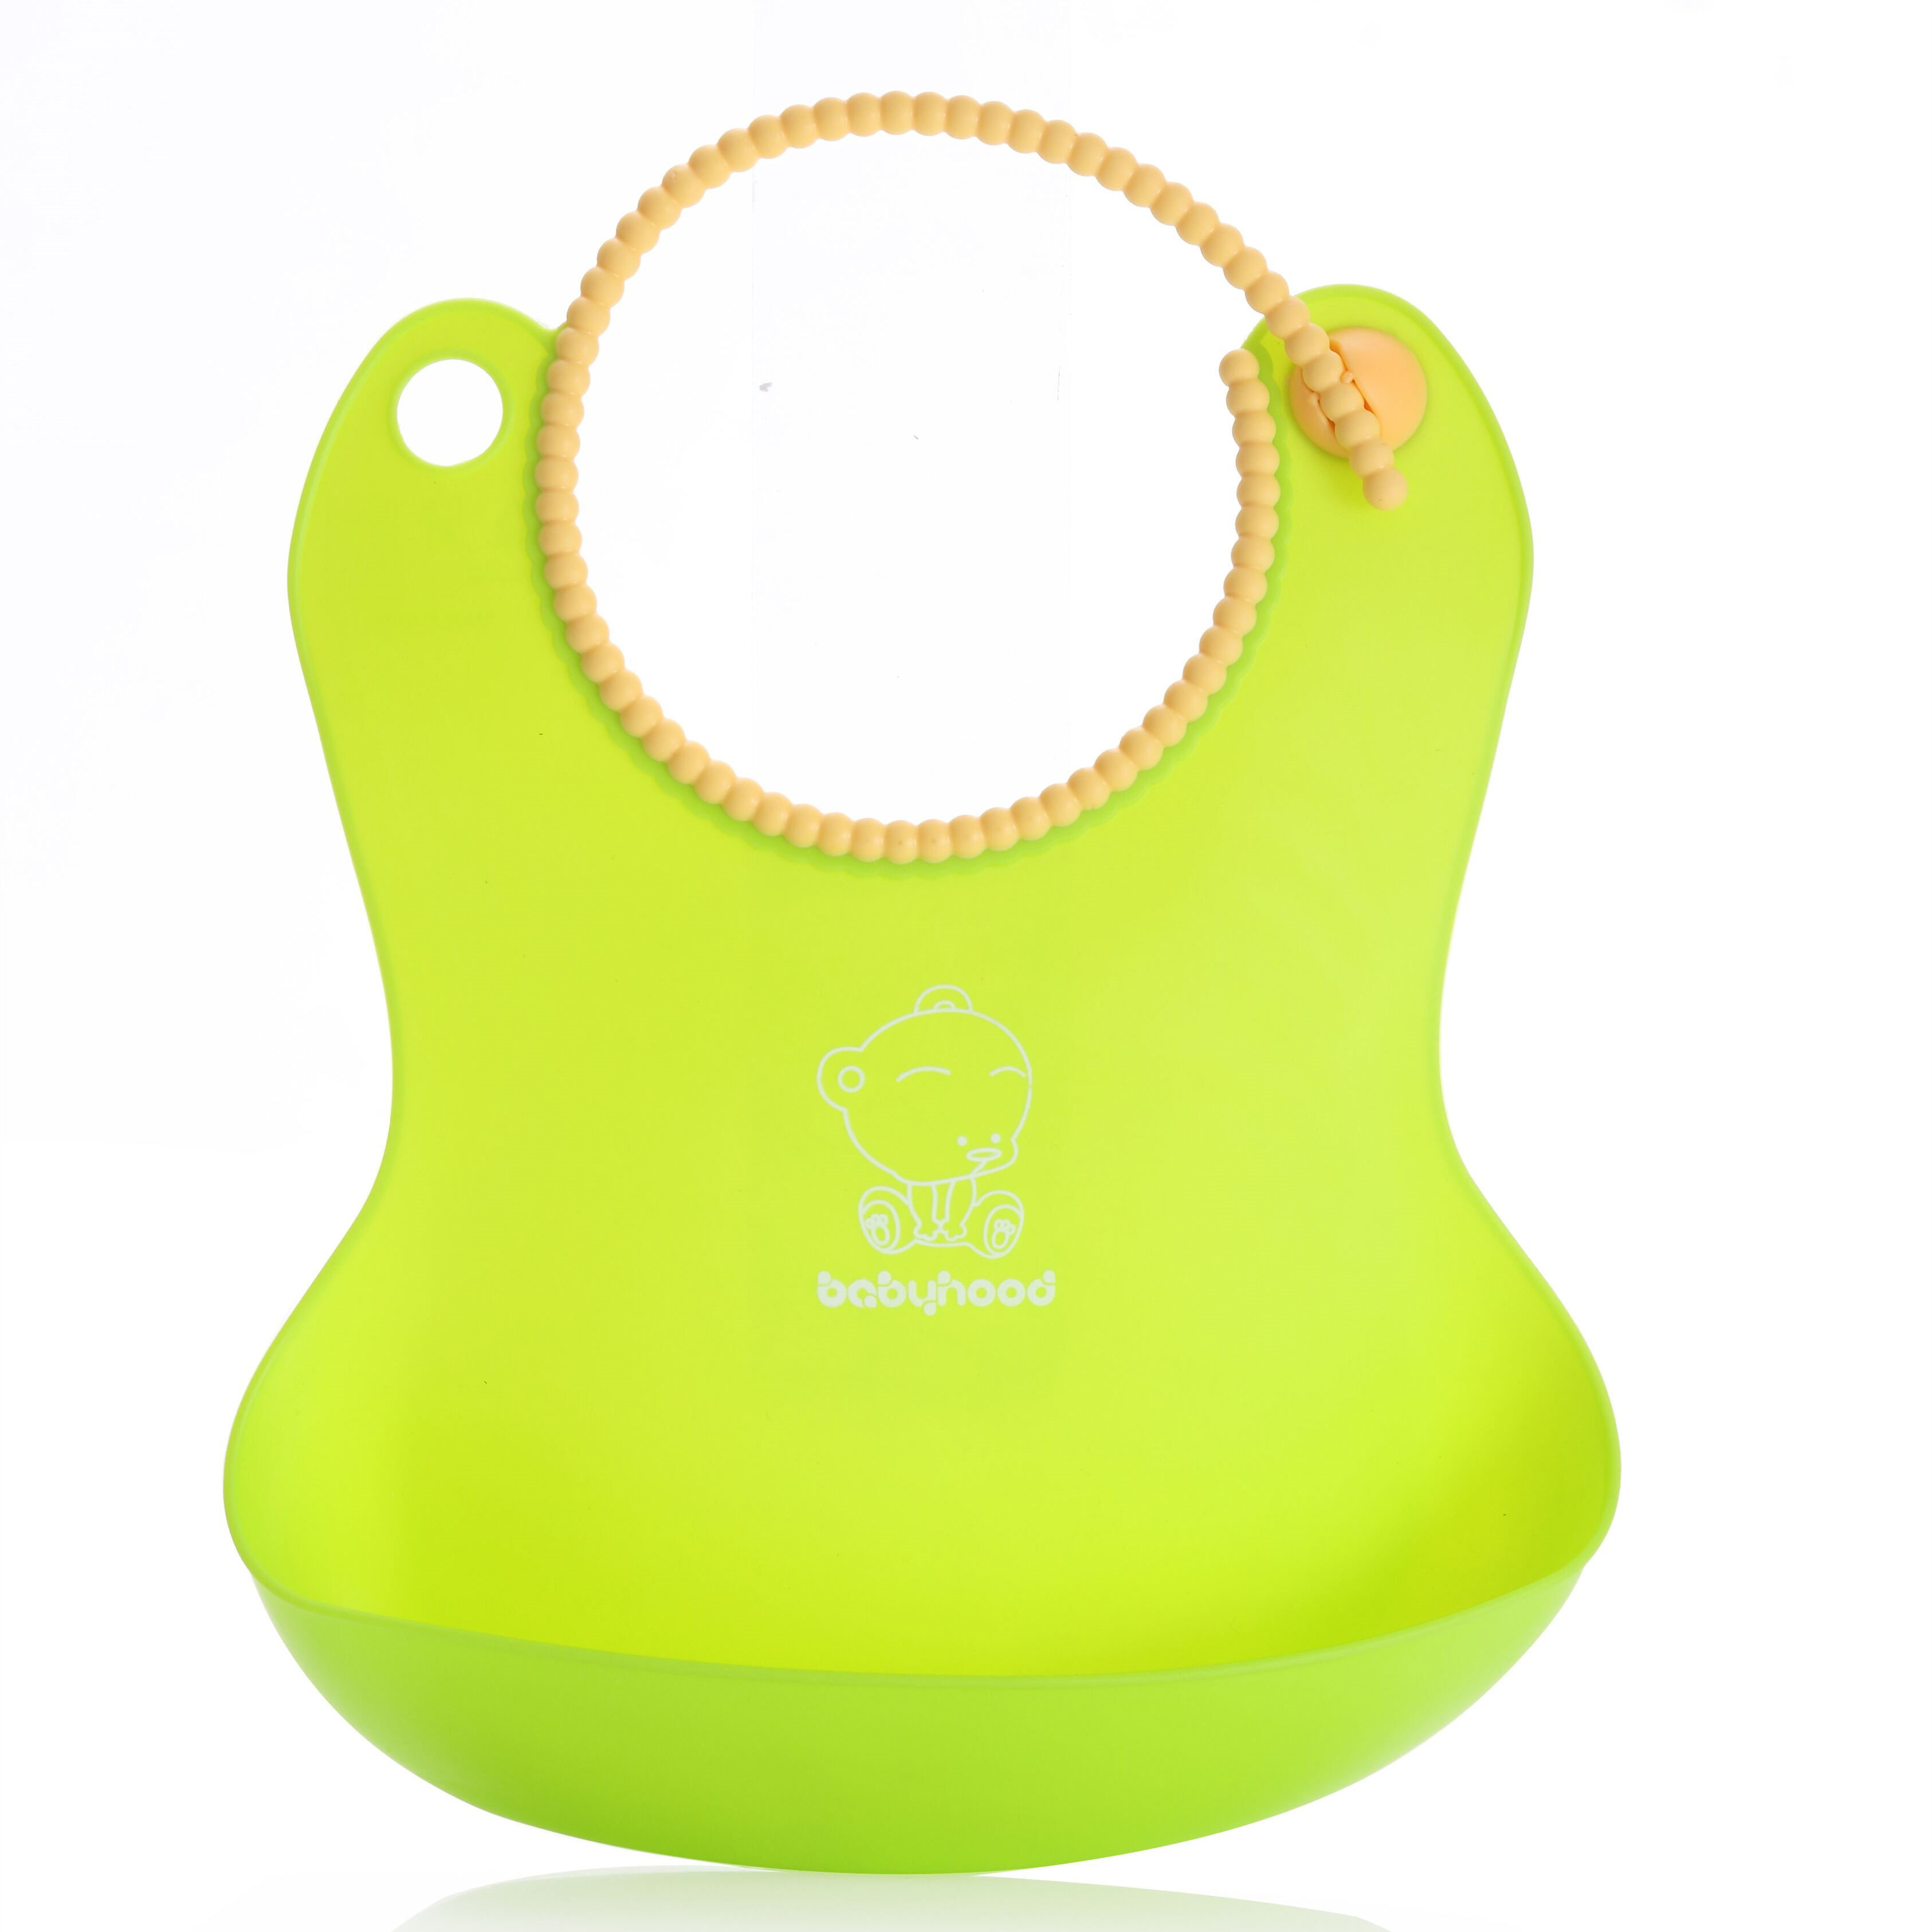 China wholesale Comfortable Feeding Chair Factory –  Wholesale Customized Waterproof Silicone Baby Bibs BH-401 – Babyhood